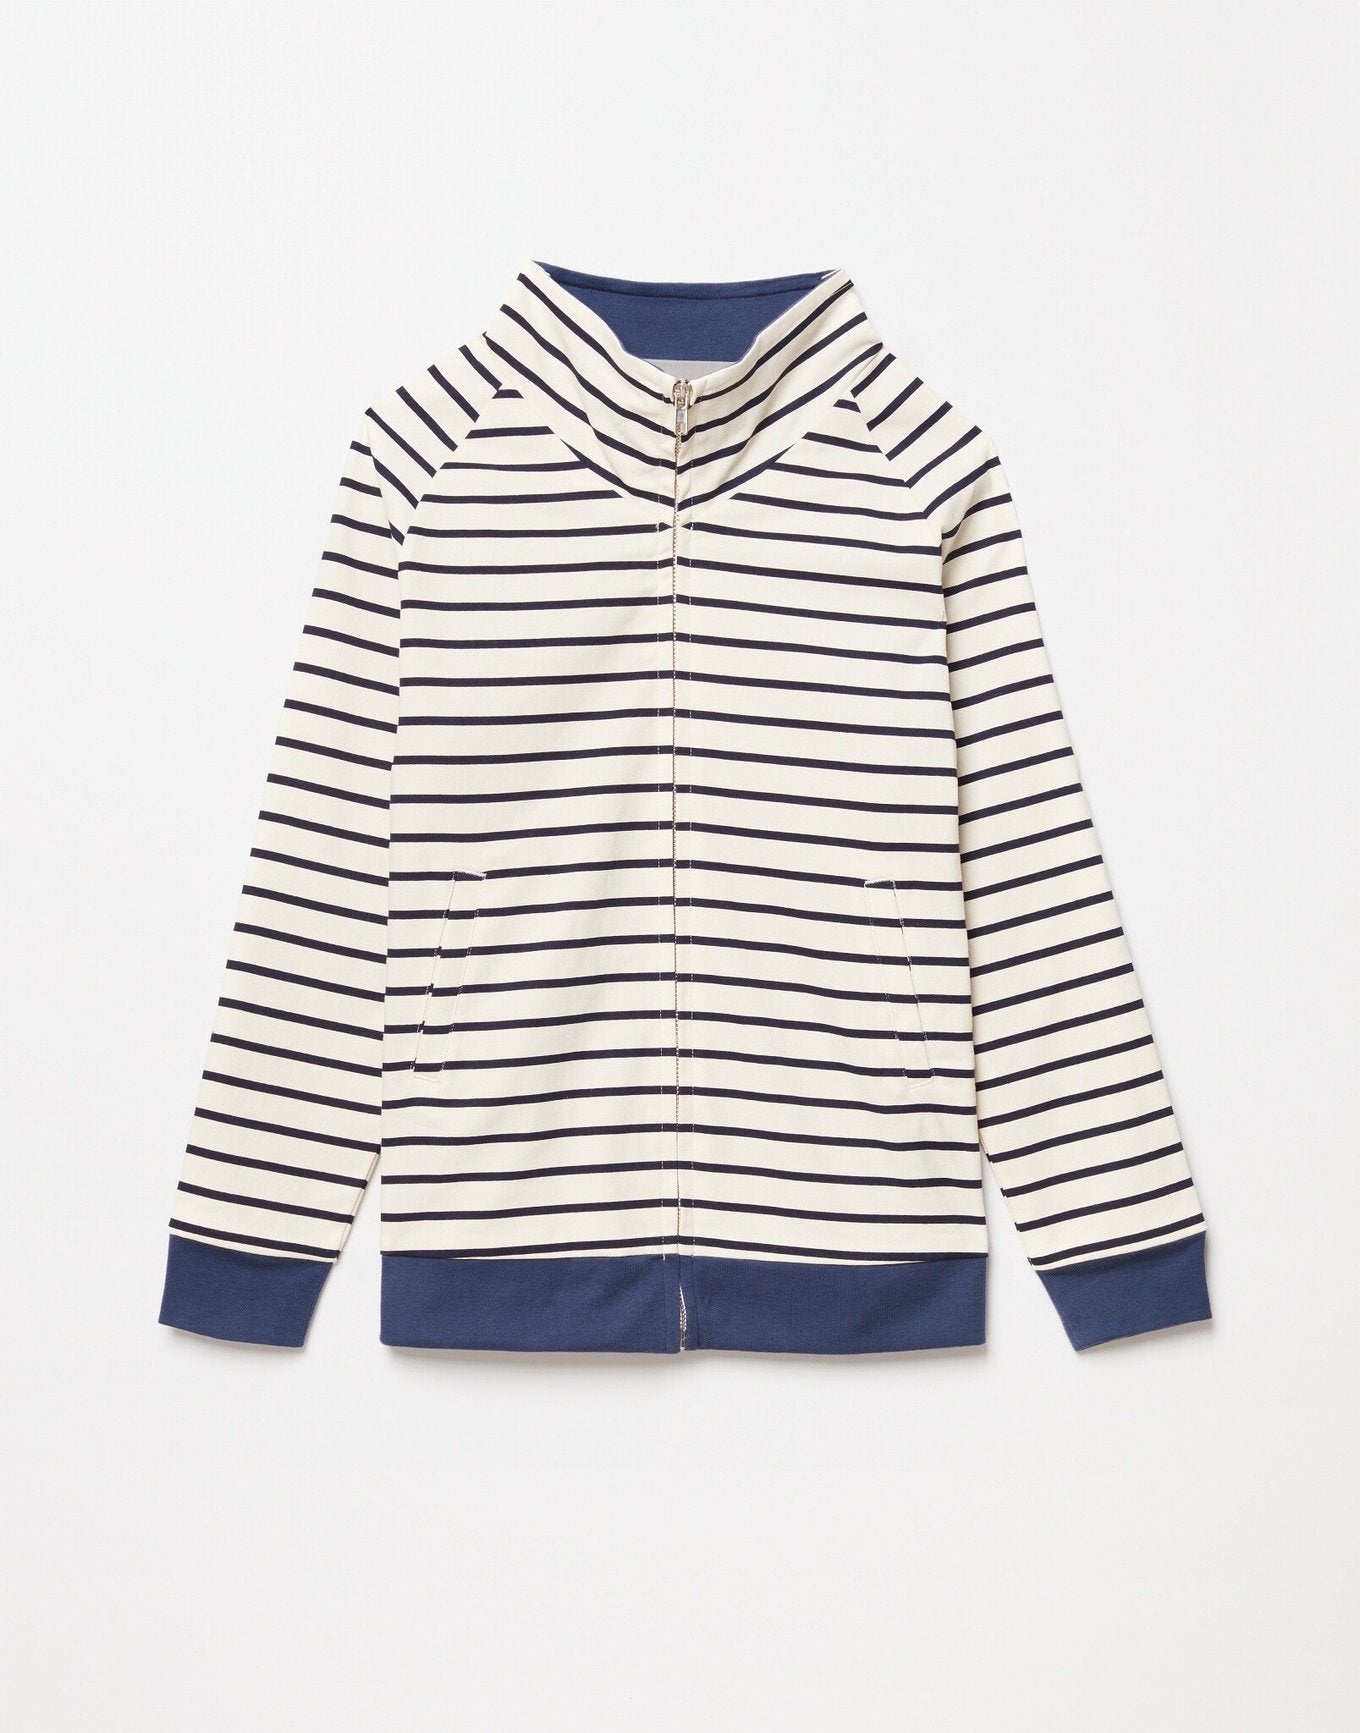 Outlines Kids Silas in color Pin and shape jacket